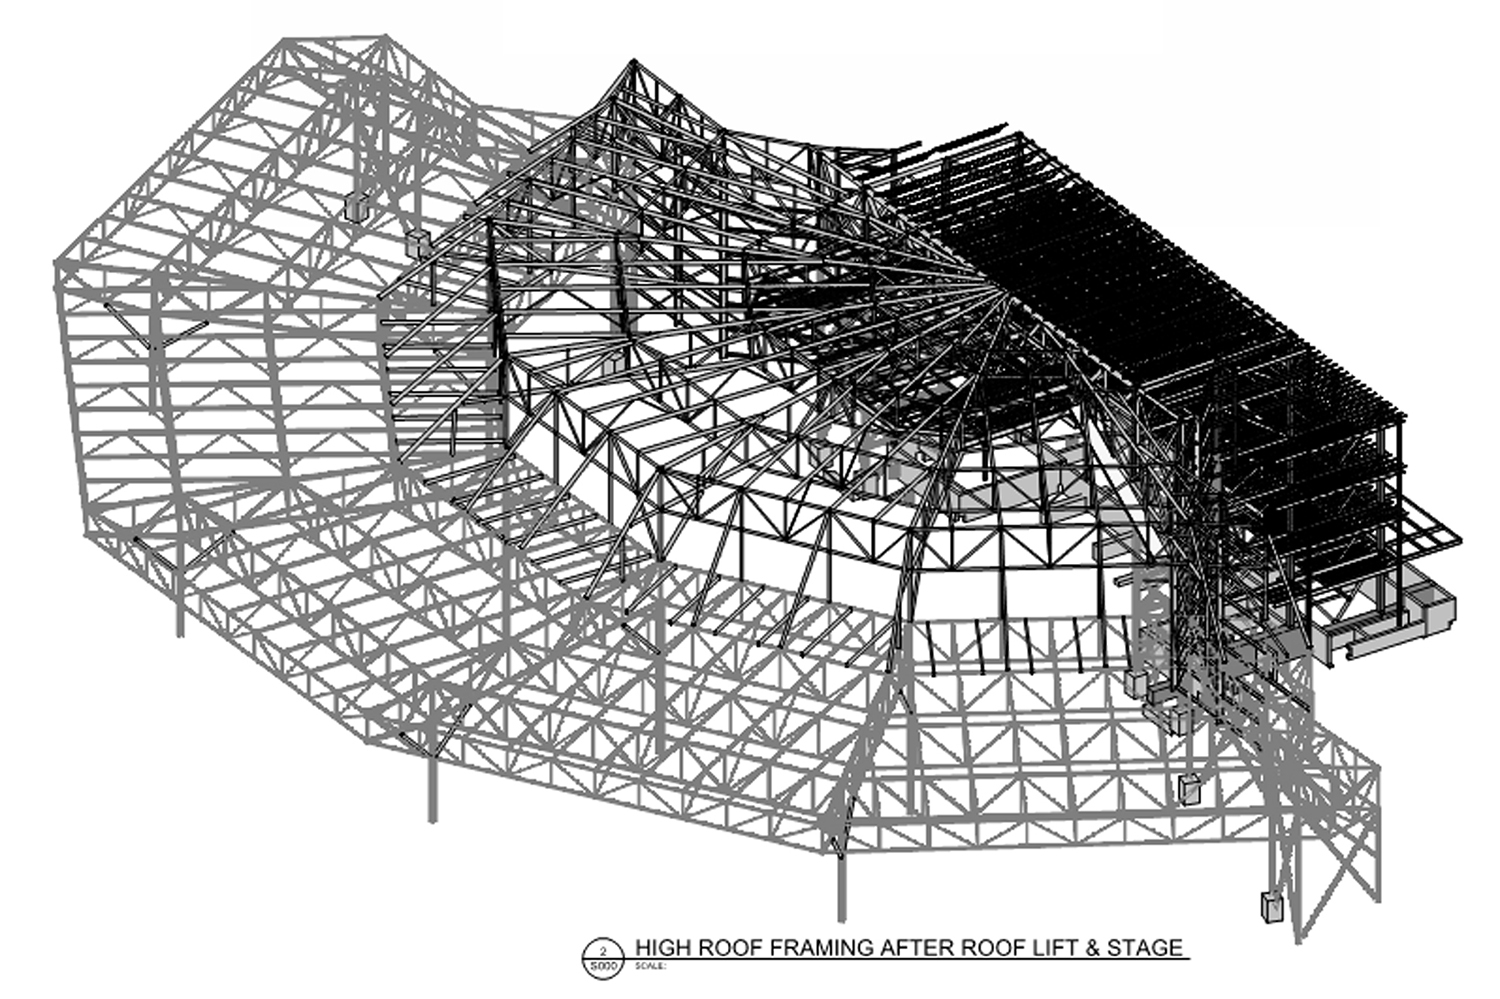 6_Revit model of existing roof and lifted roof with new support framing and new stage building framing-credit Larson.jpg